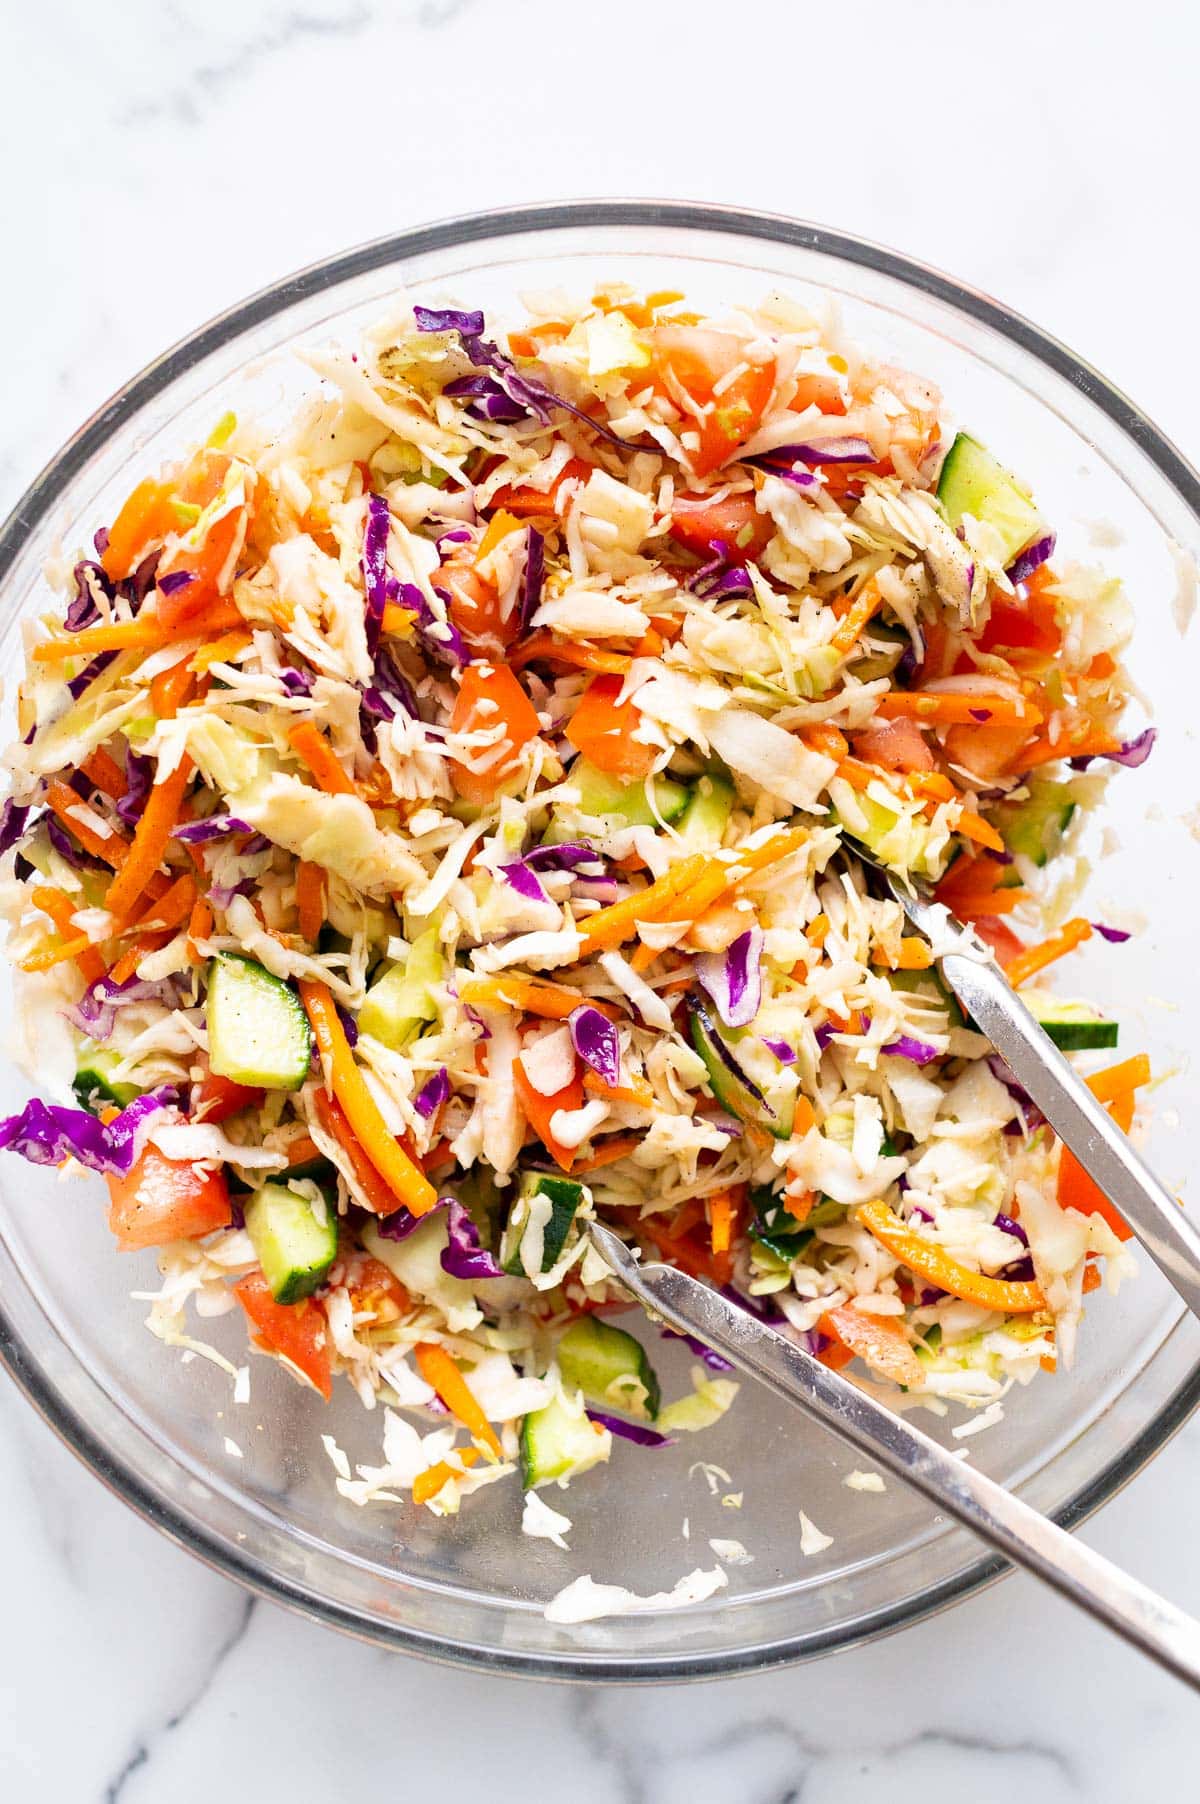 Coleslaw in a glass bowl with metal tongs.